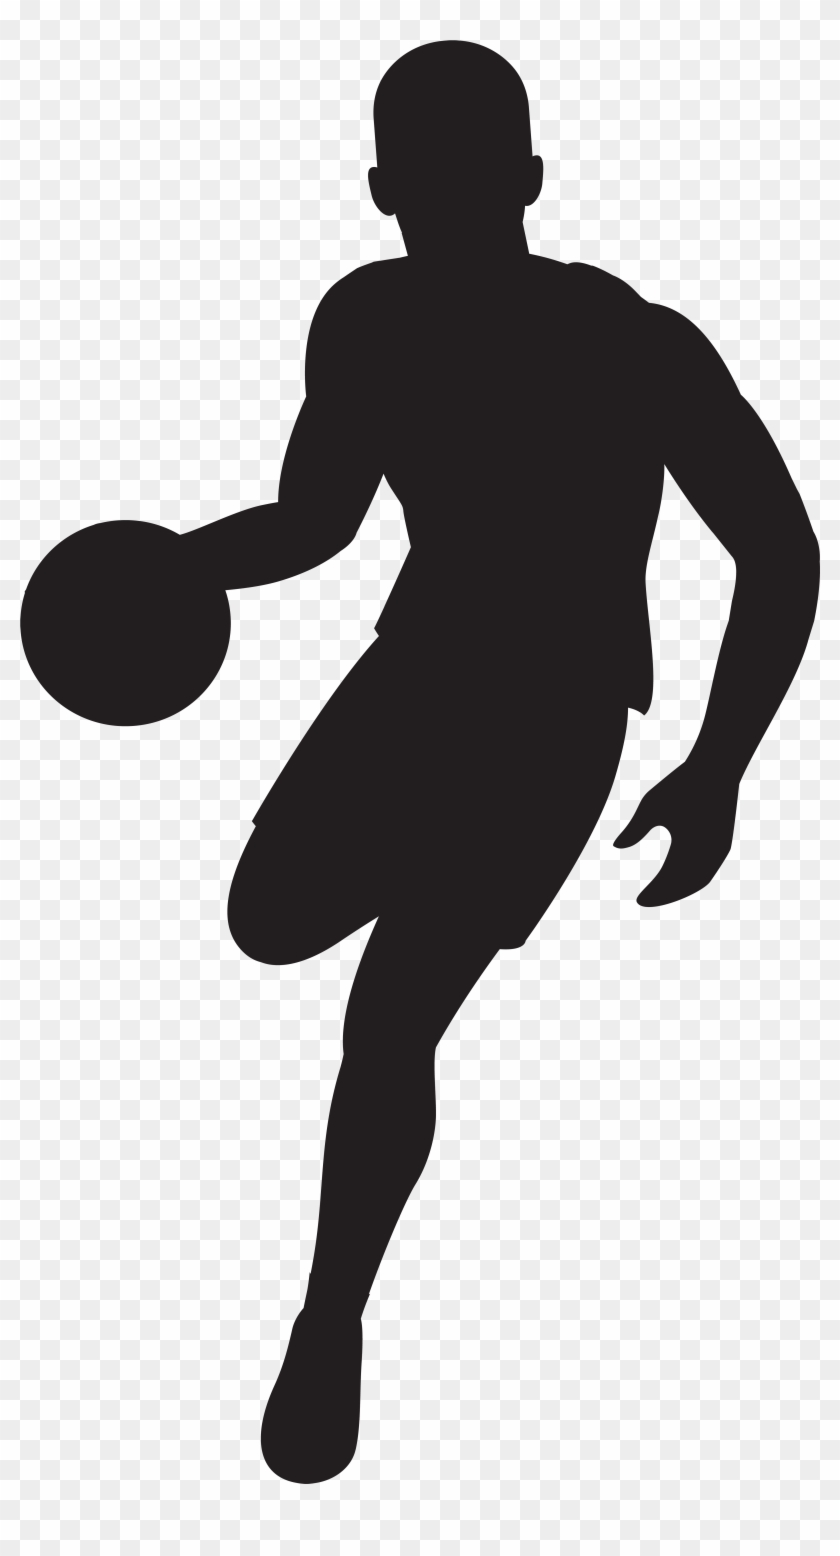 Basketball Player Silhouette Clip Art Image - Basketball Player Silhouette Png Transparent Png #35525